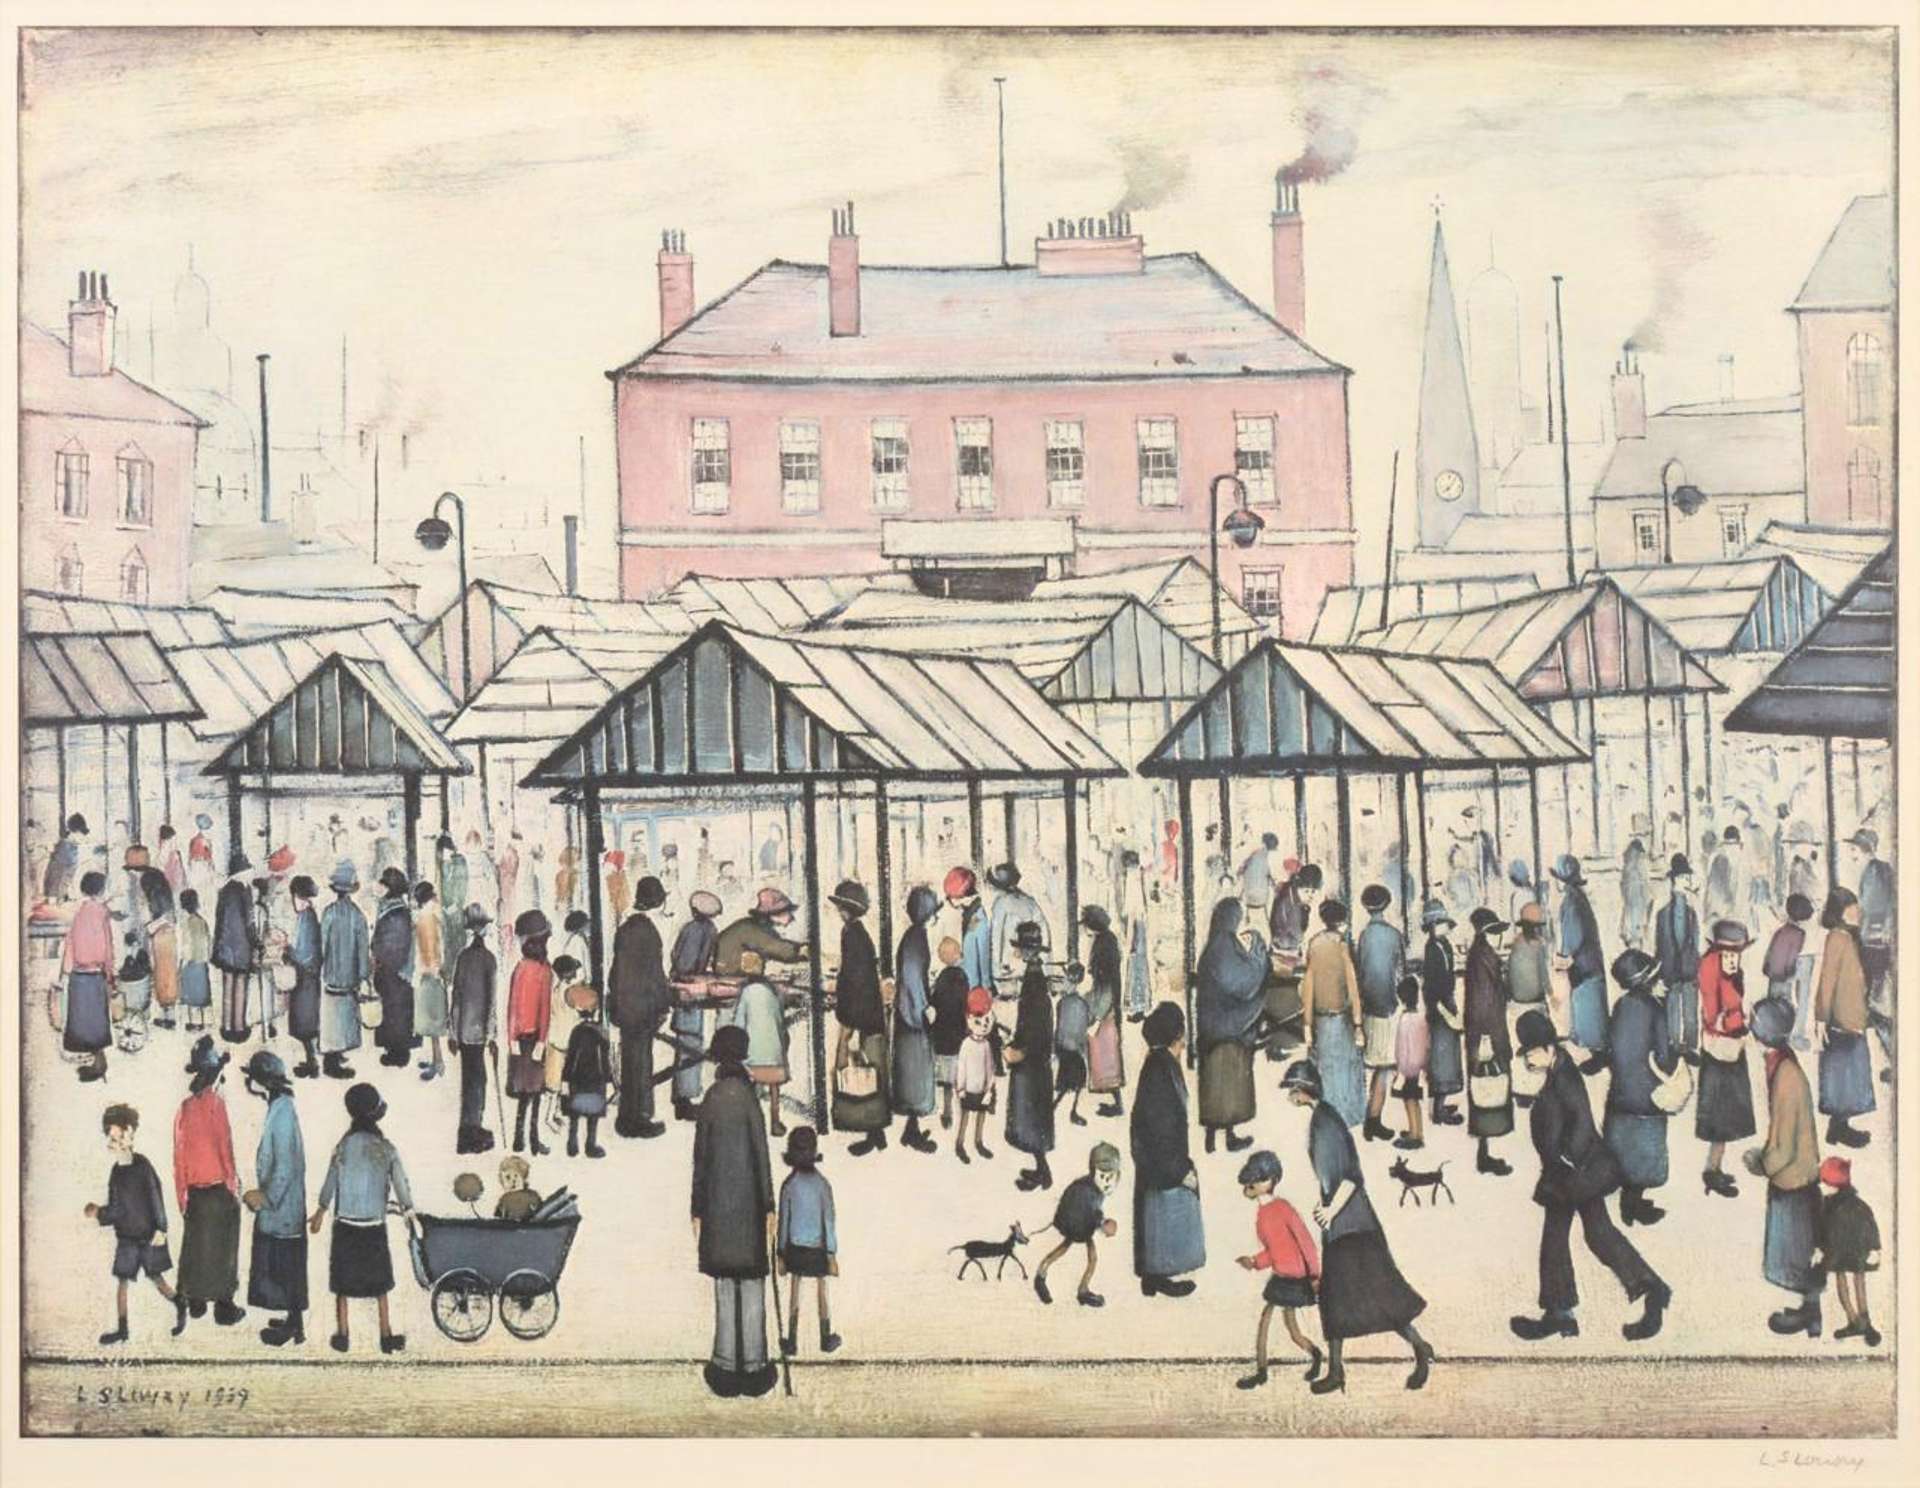 Illustration of a crowd in a busy market